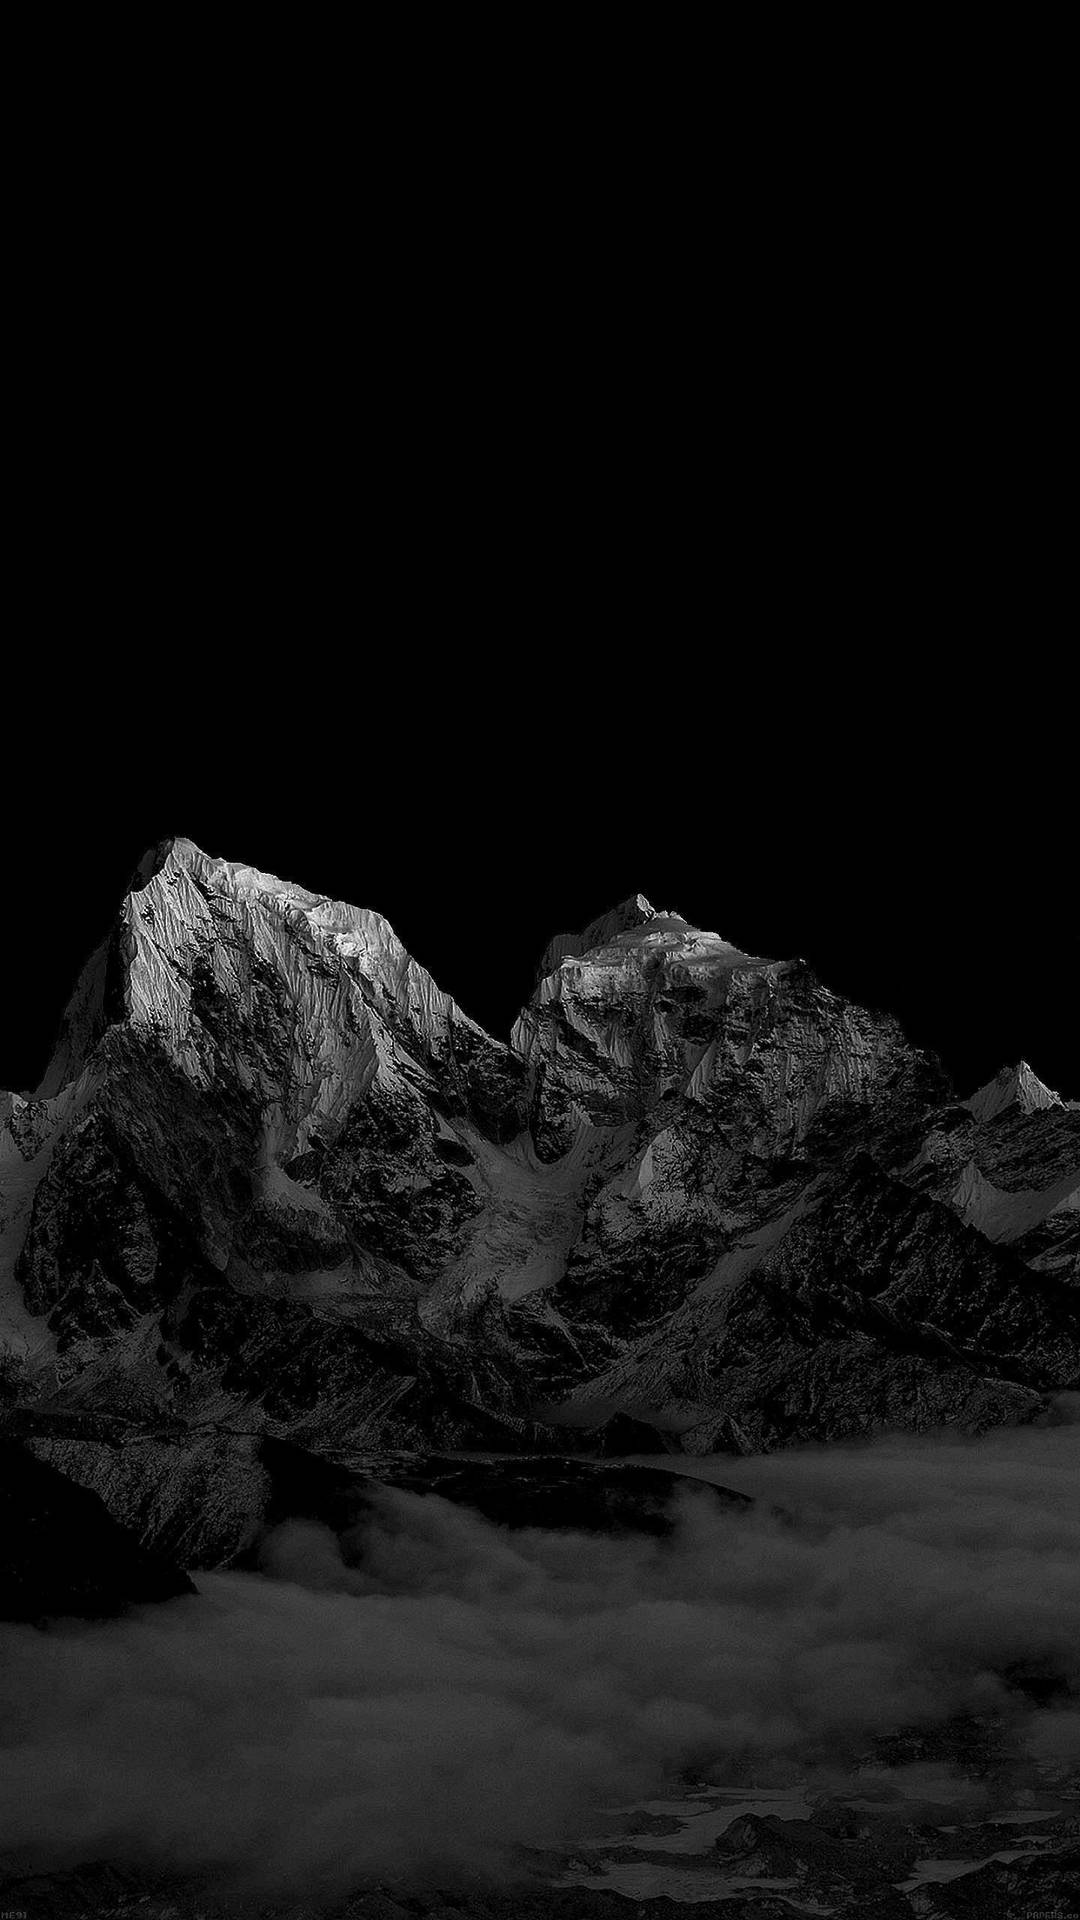 Monochrome Snowy Mountains Iphone X Amoled Wallpaper